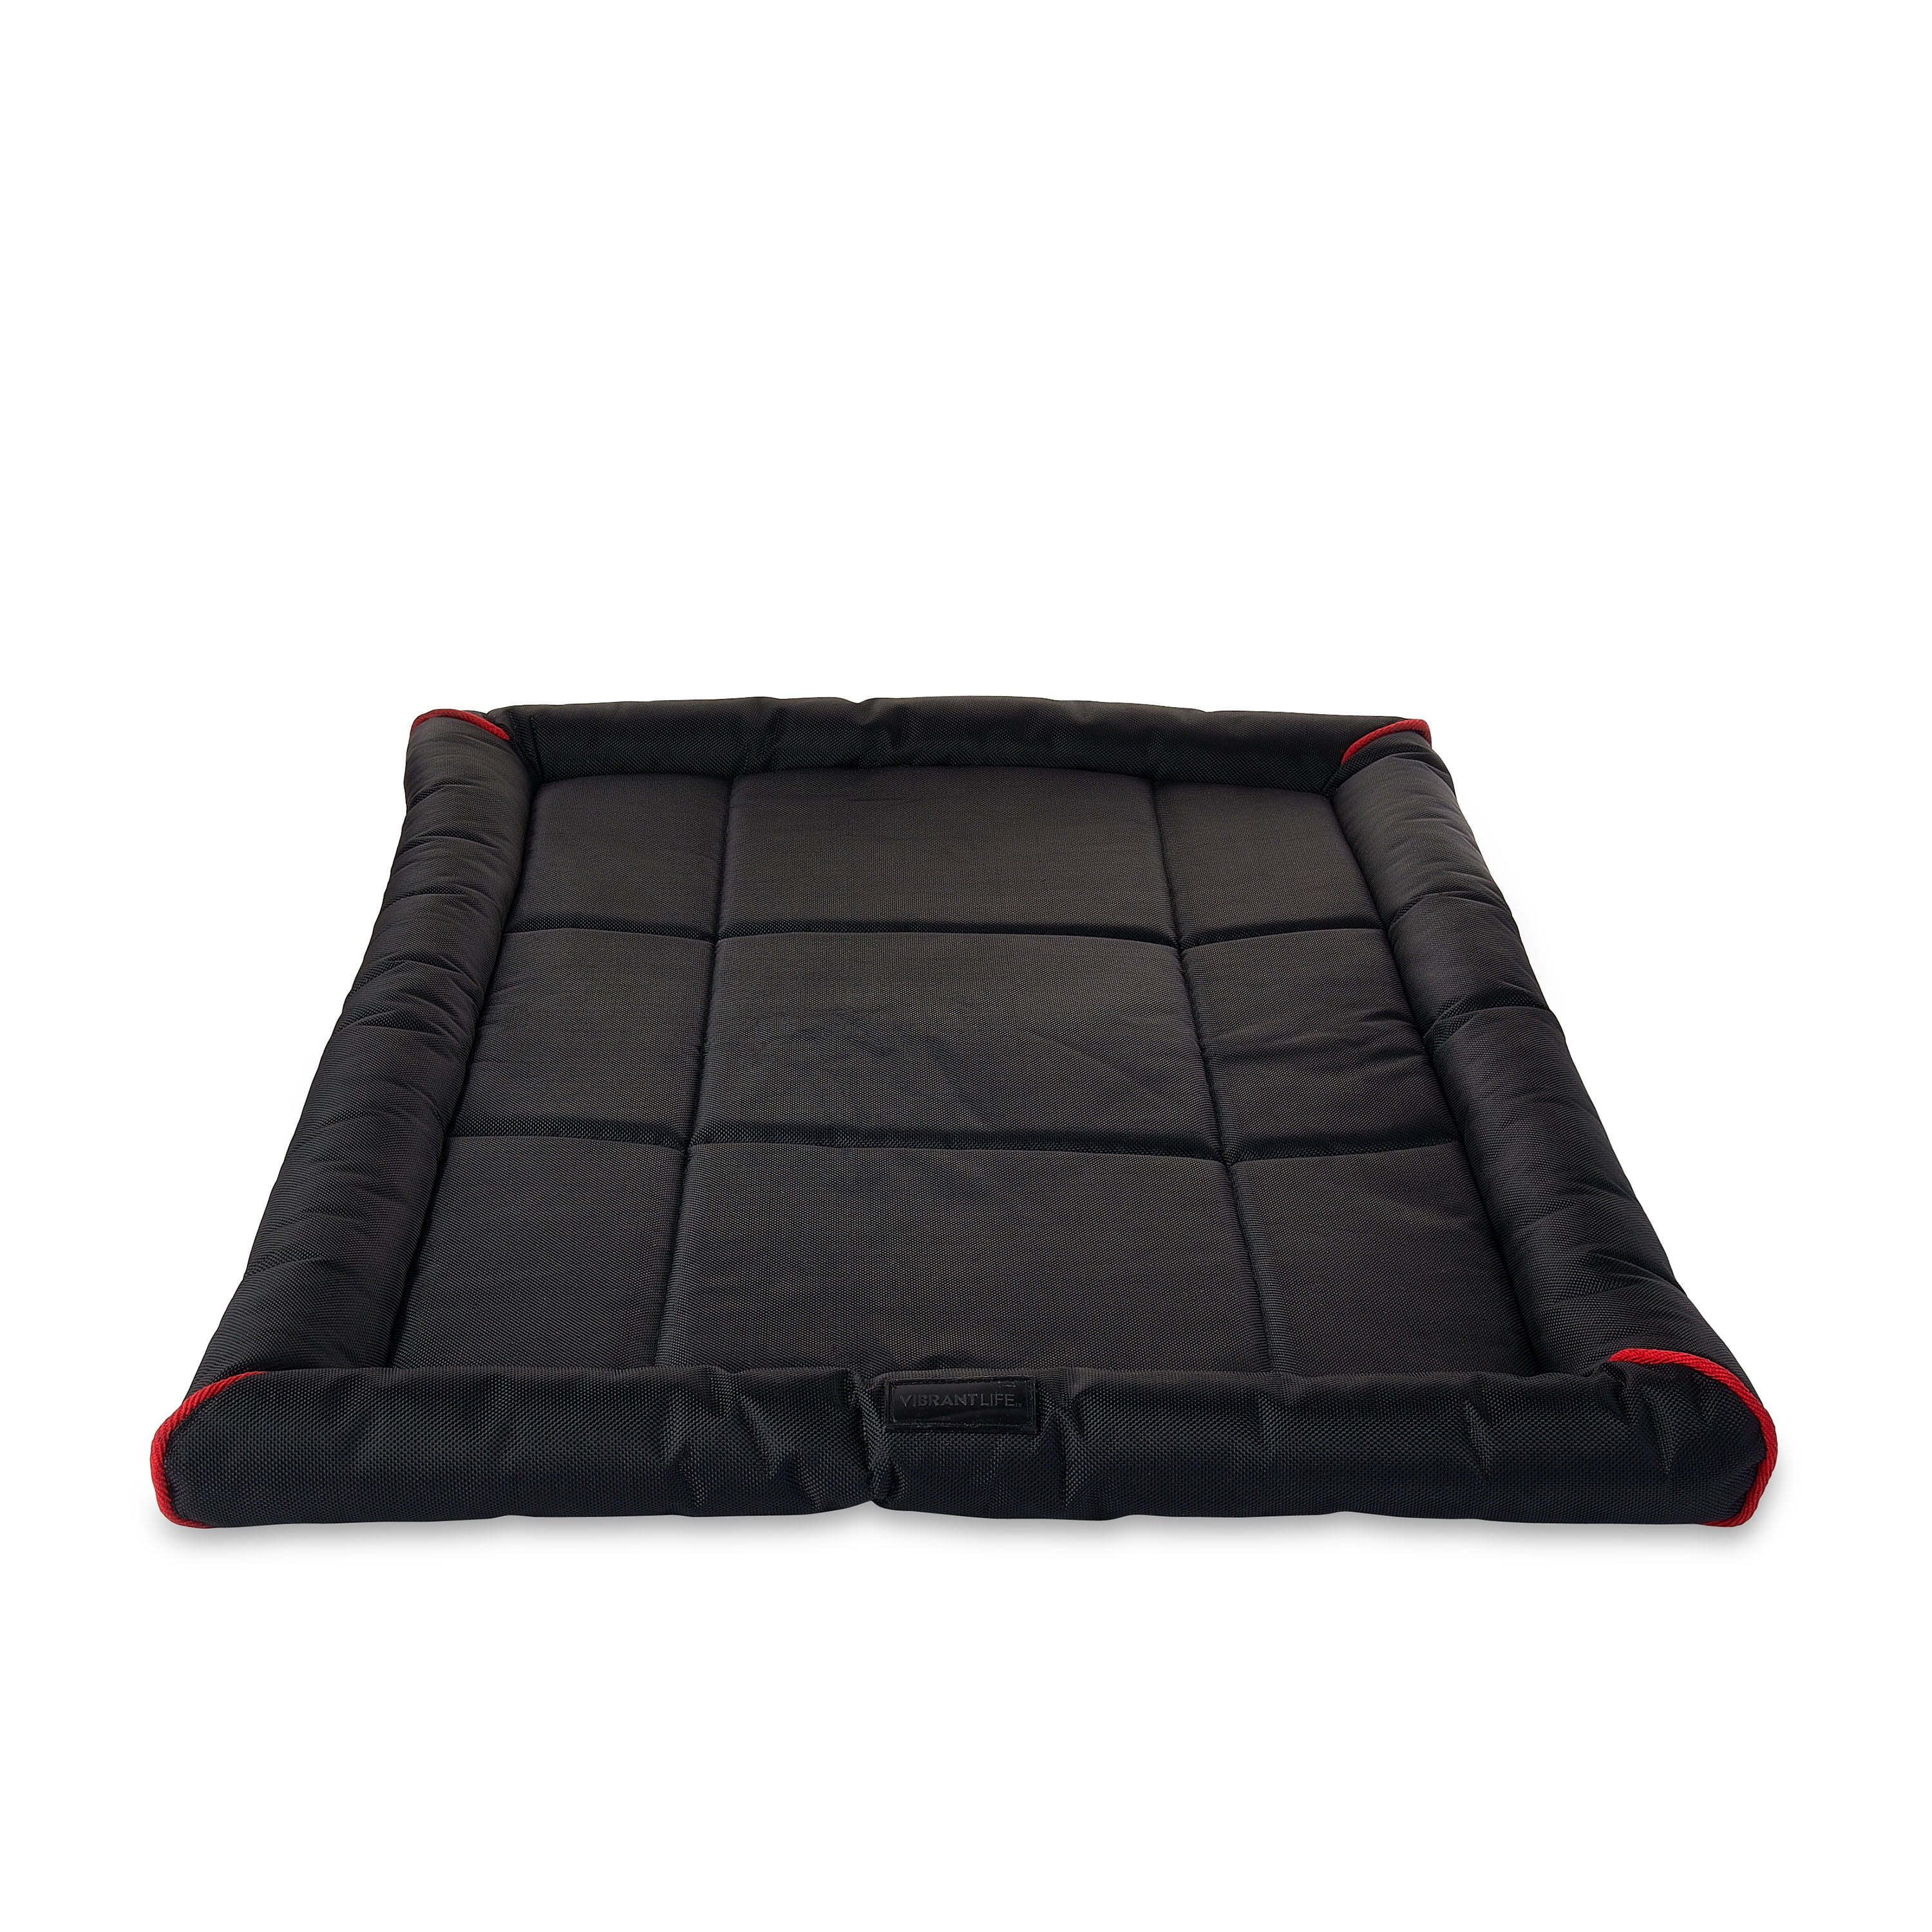 Vibrant Life Durable & Water-Resistant Dog Crate Mat, Black, 36"